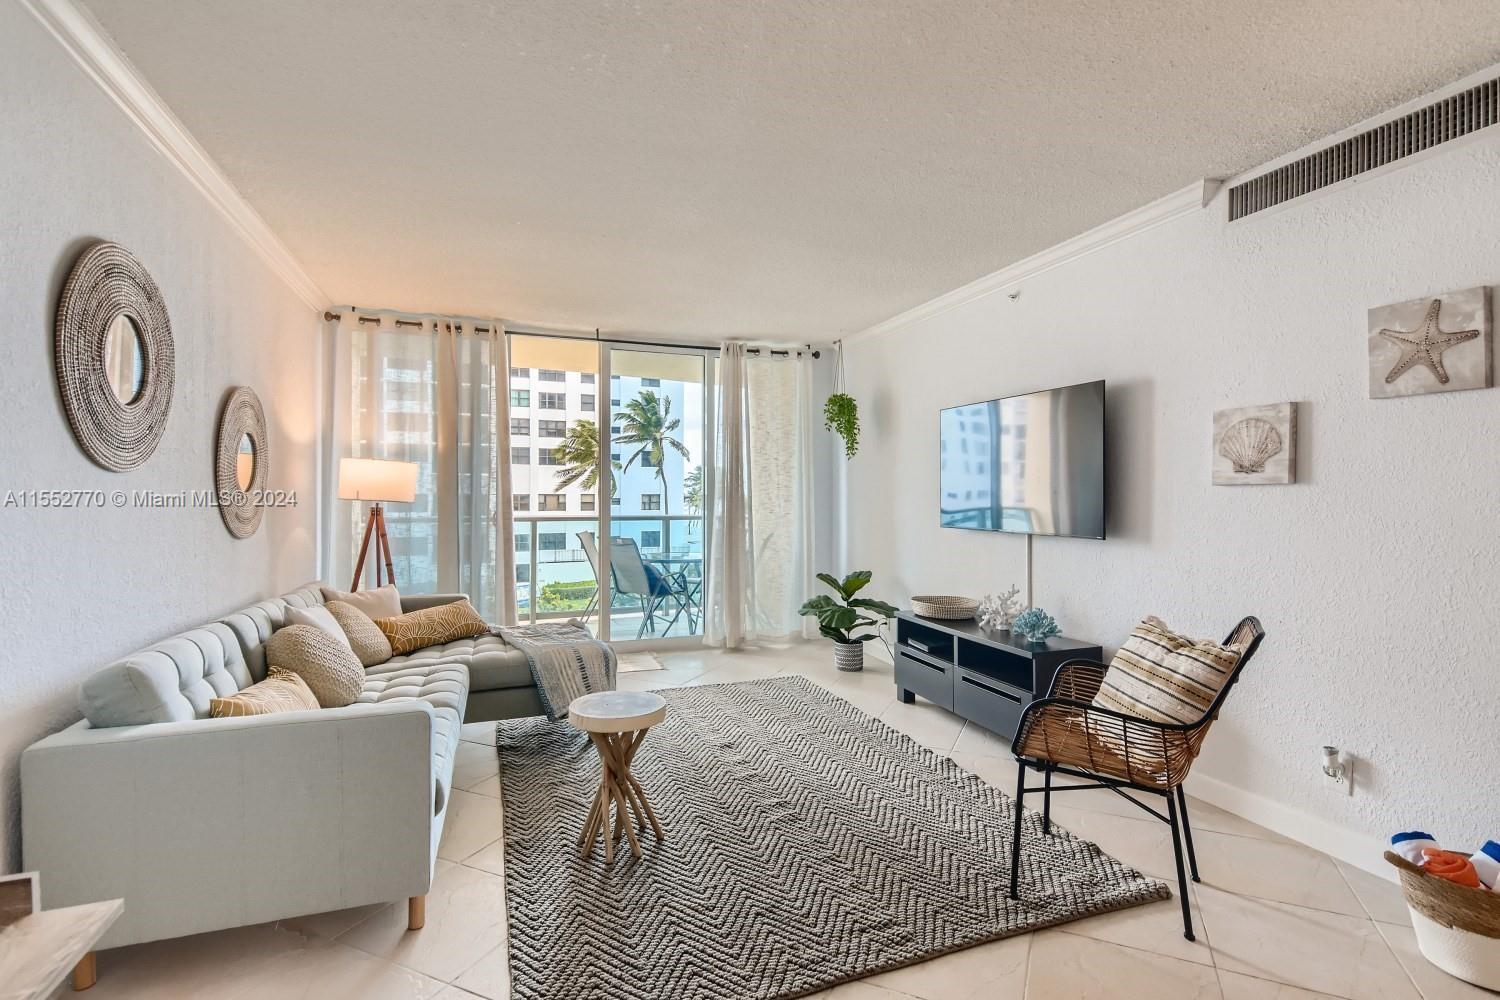 Photo of 2501 S Ocean Dr #308 (Available) in Hollywood, FL